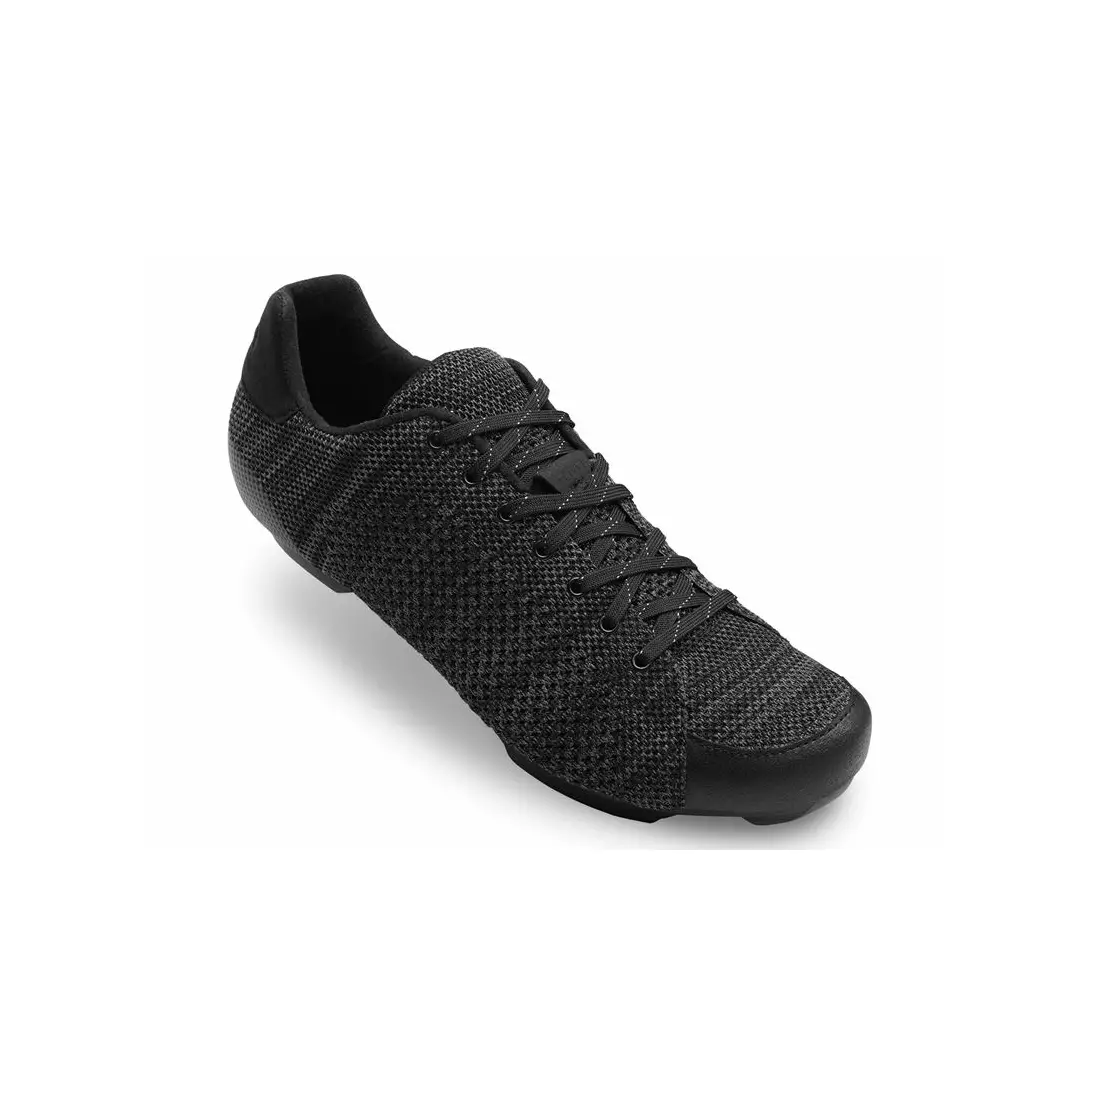 GIRO Men's bicycle boots REPUBLIC R KNIT black charcoal heather 